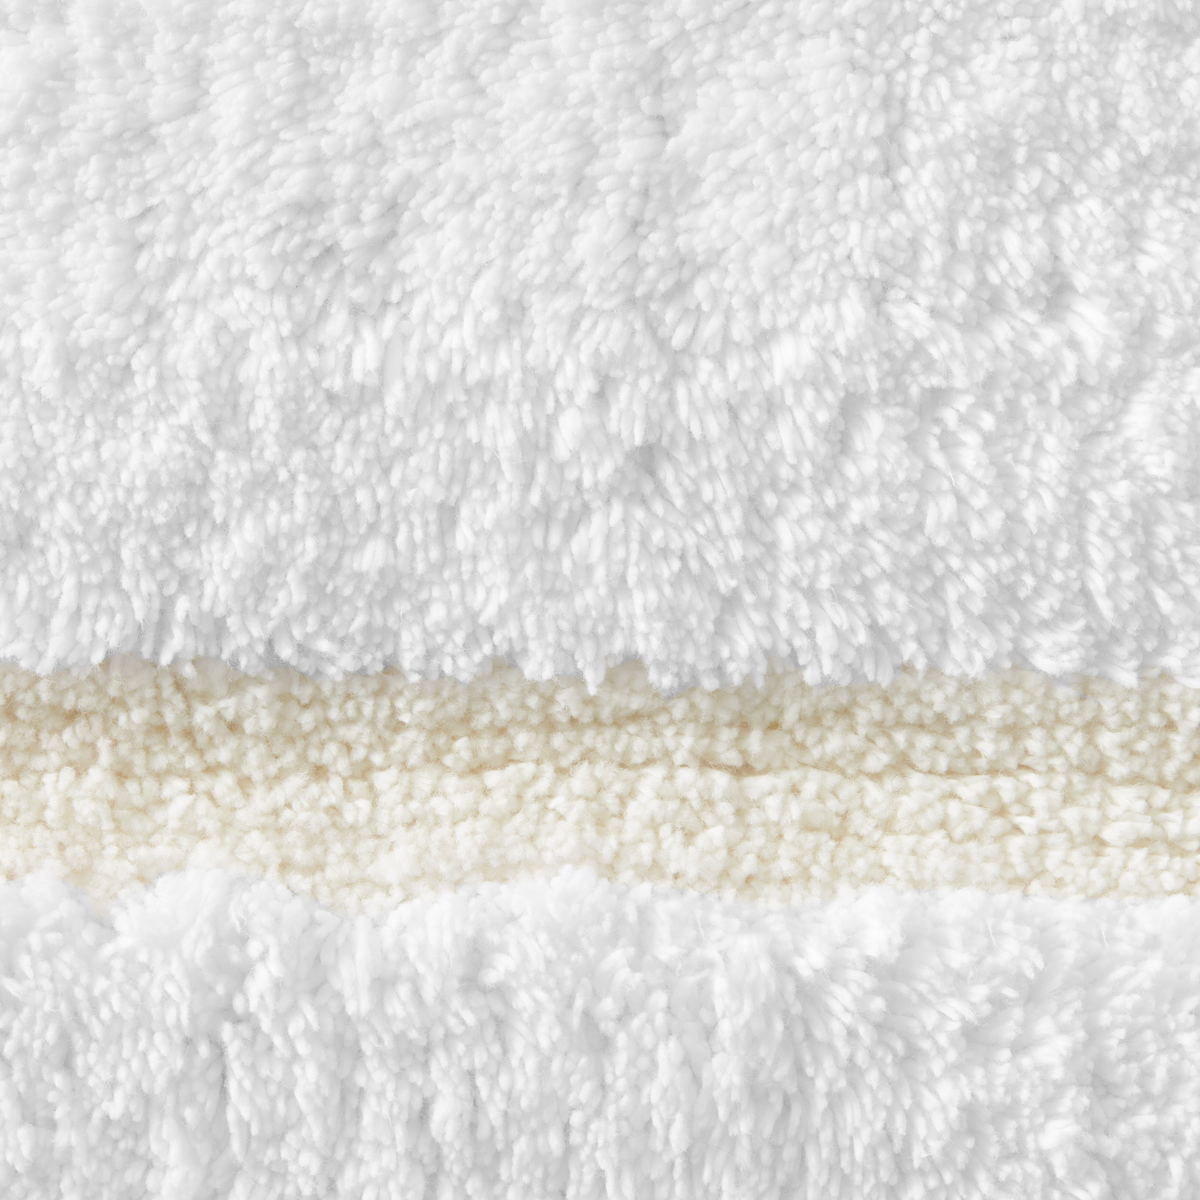 Swatch Sample of Sferra Lindo Bath Rugs in White Ivory Color